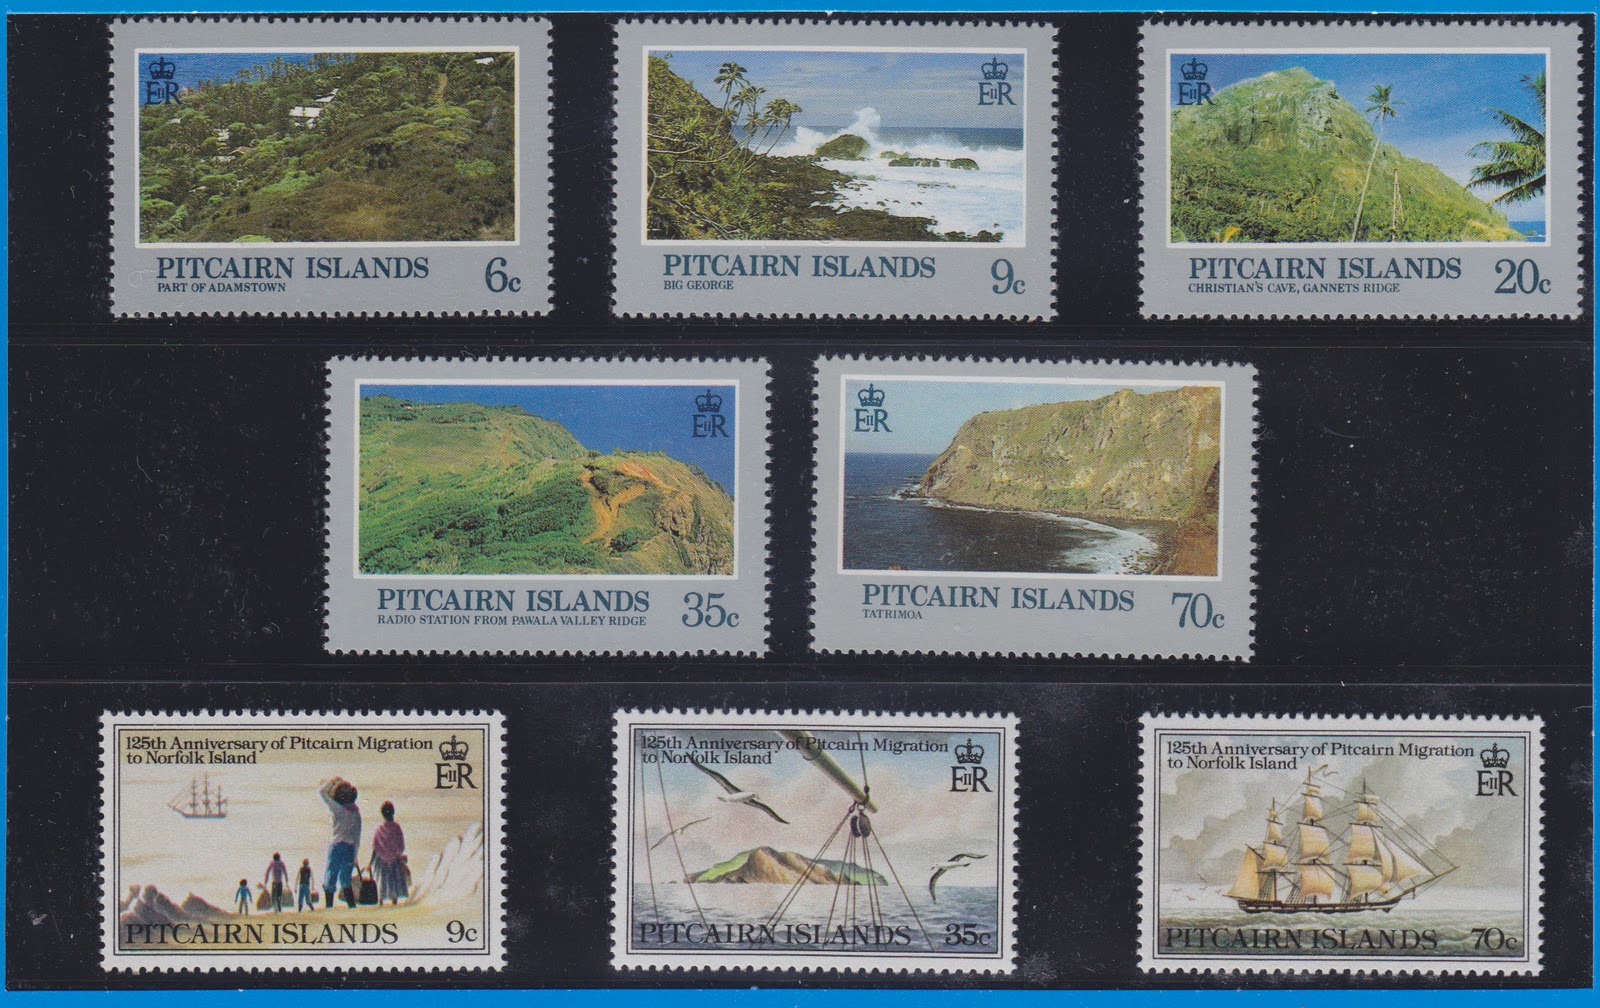 Pitcairn Island-A Booklet of Postage Stamps-Philatokyo 1981-Illustrated 